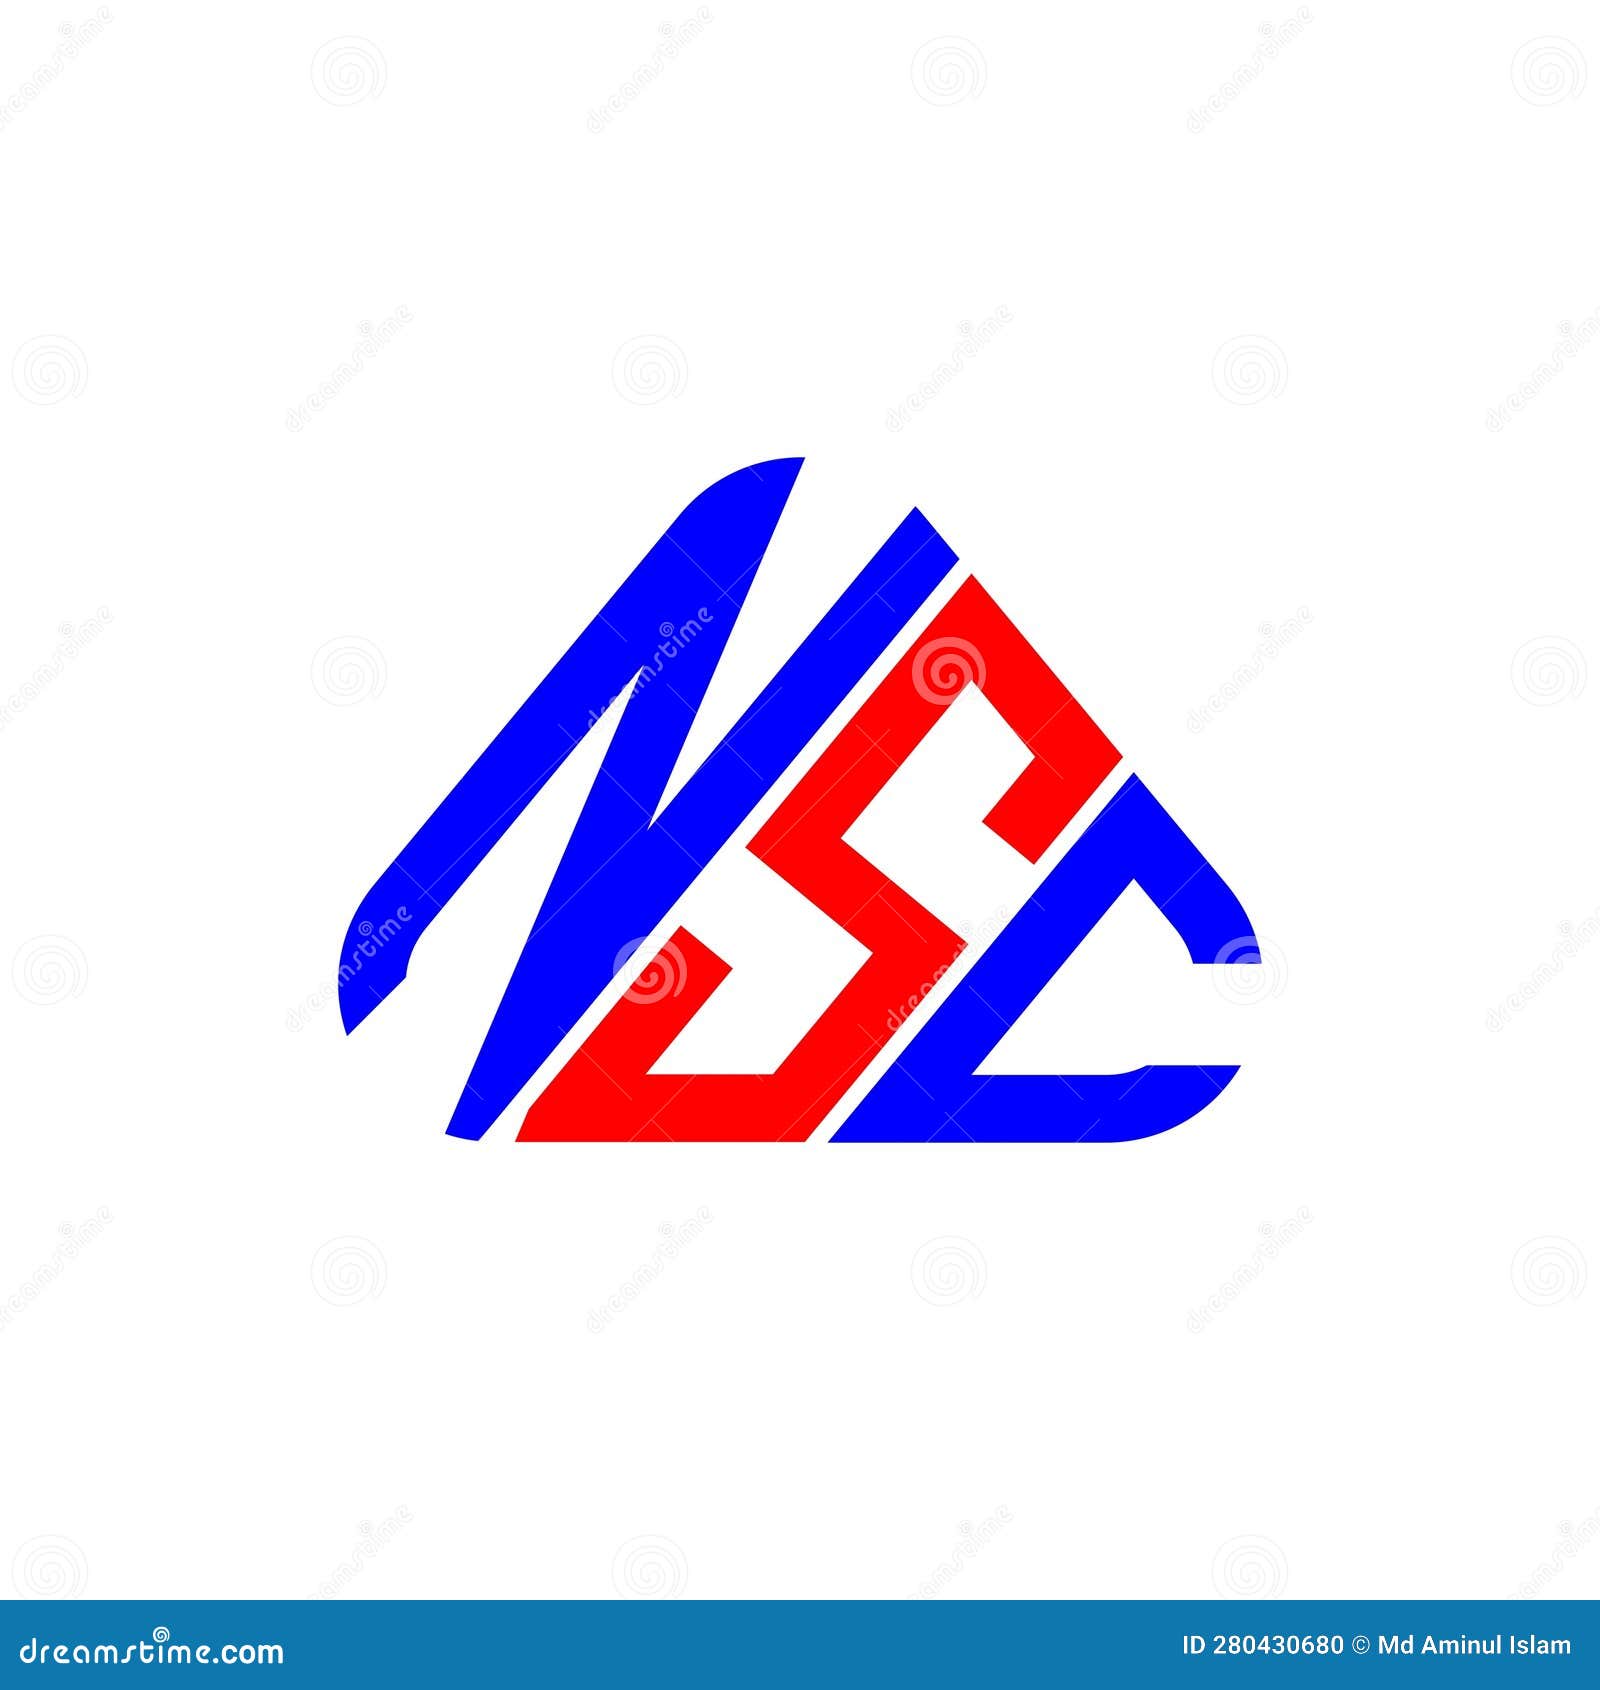 Download Previous - Nsc Minerals Logo PNG Image with No Background -  PNGkey.com